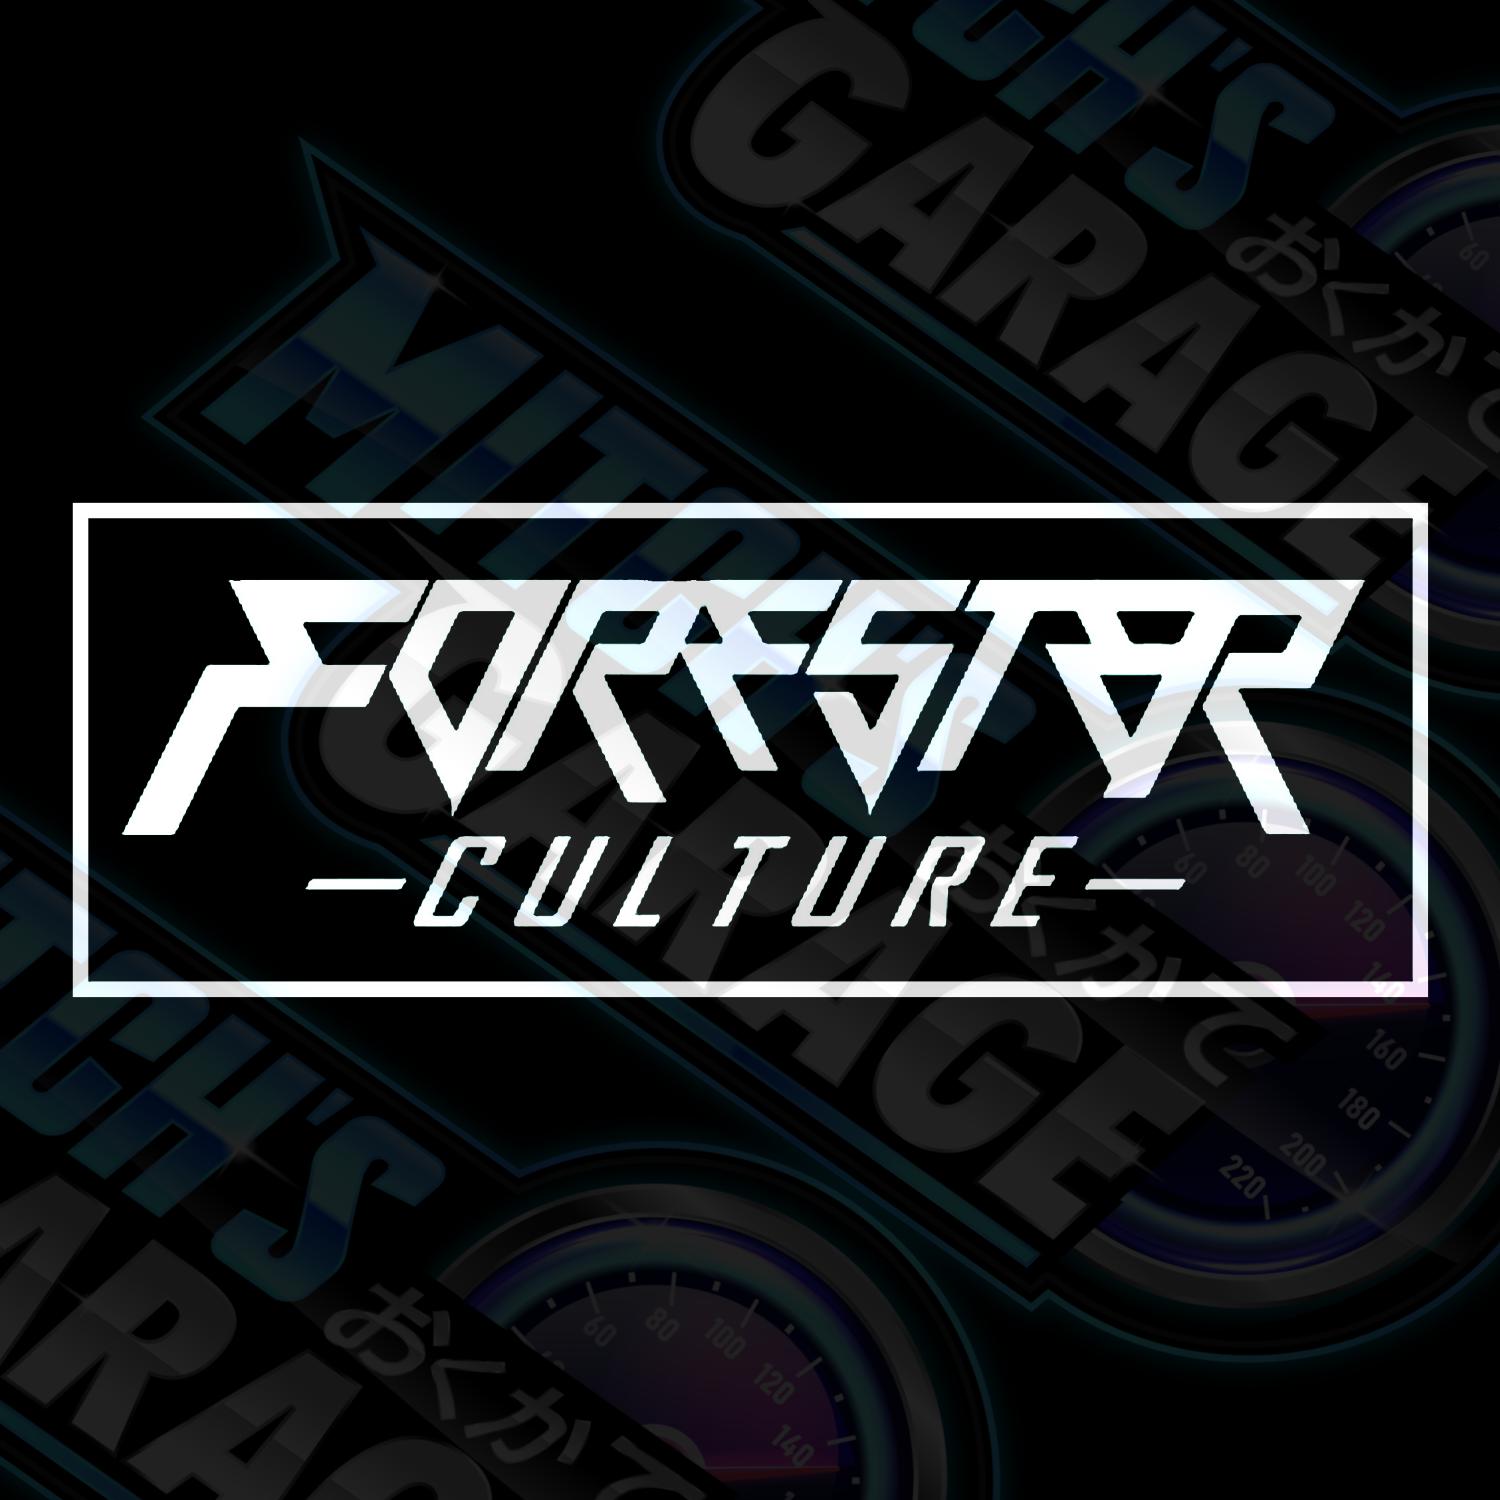 FORESTER Culture Vinyl Decal